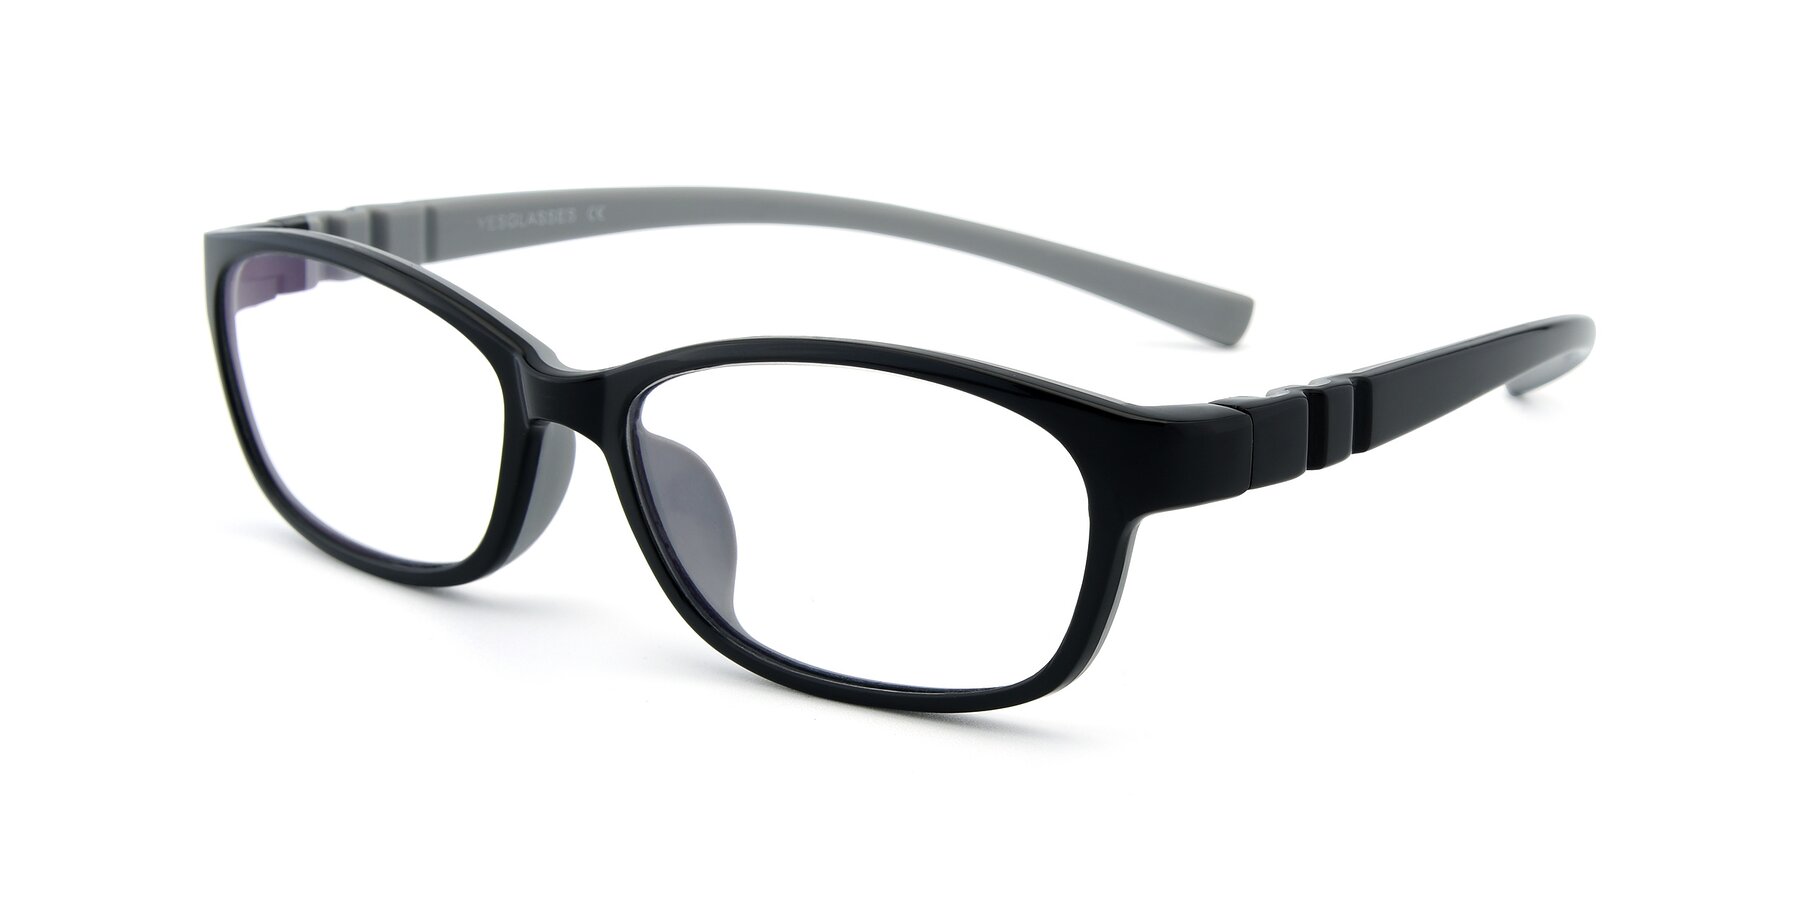 Angle of 556 in Black-Gray with Clear Eyeglass Lenses